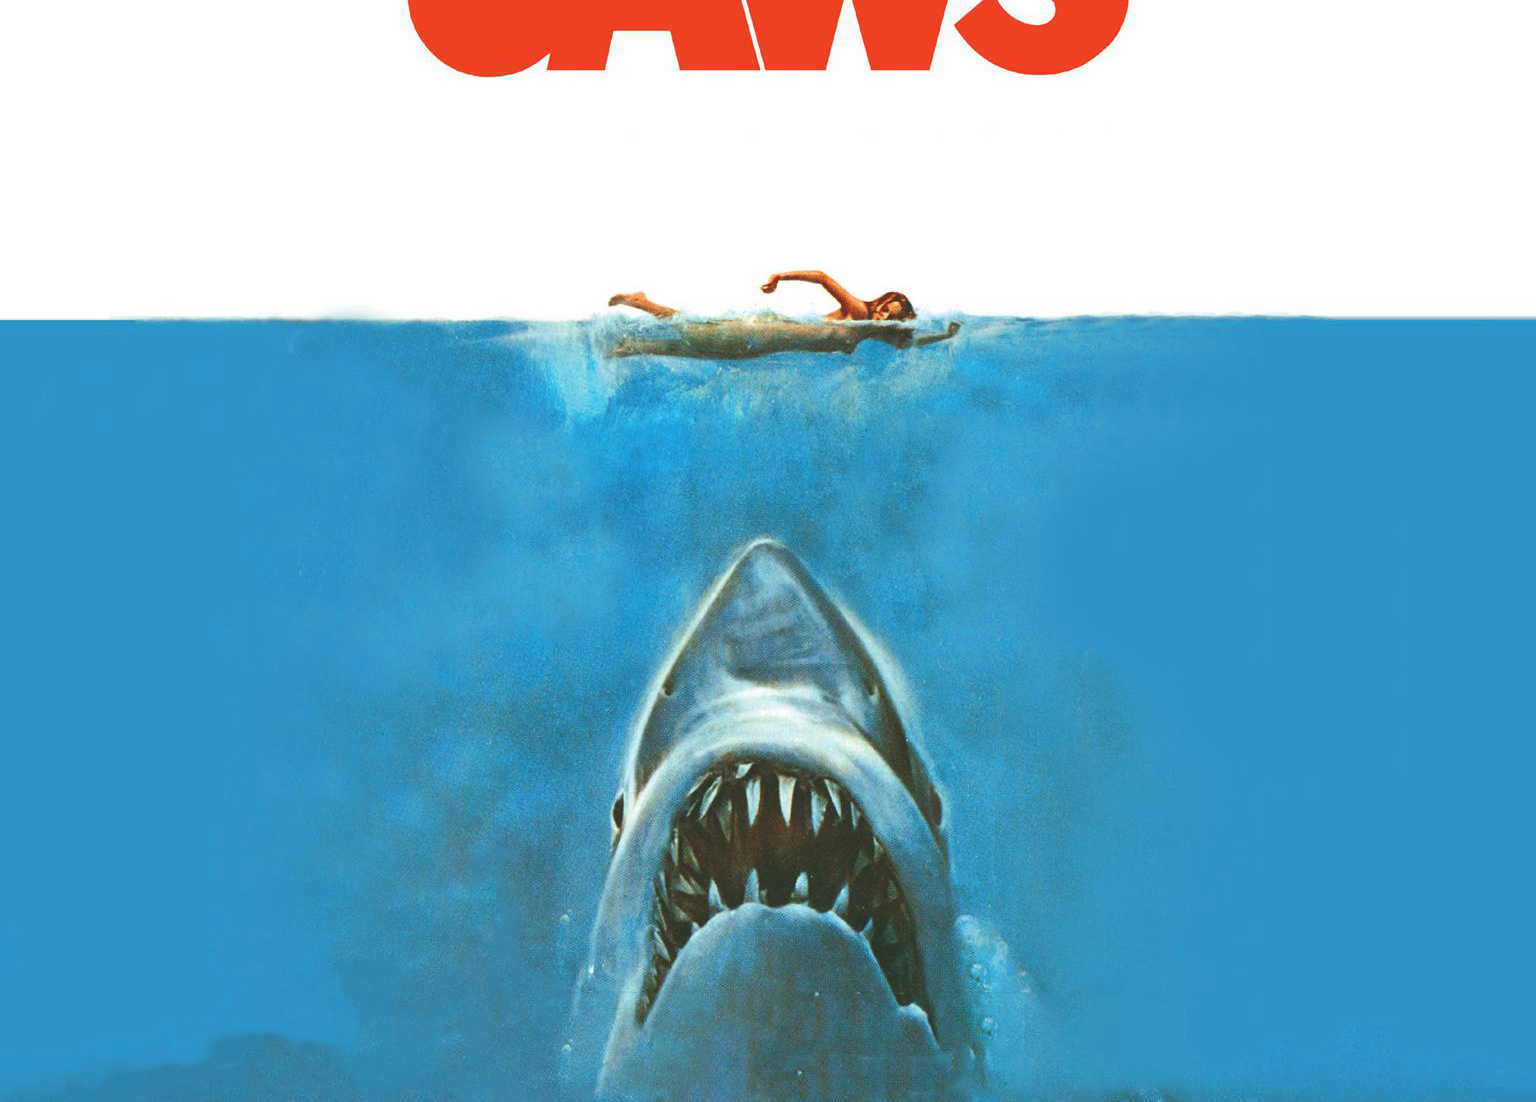 The Jaws Poster